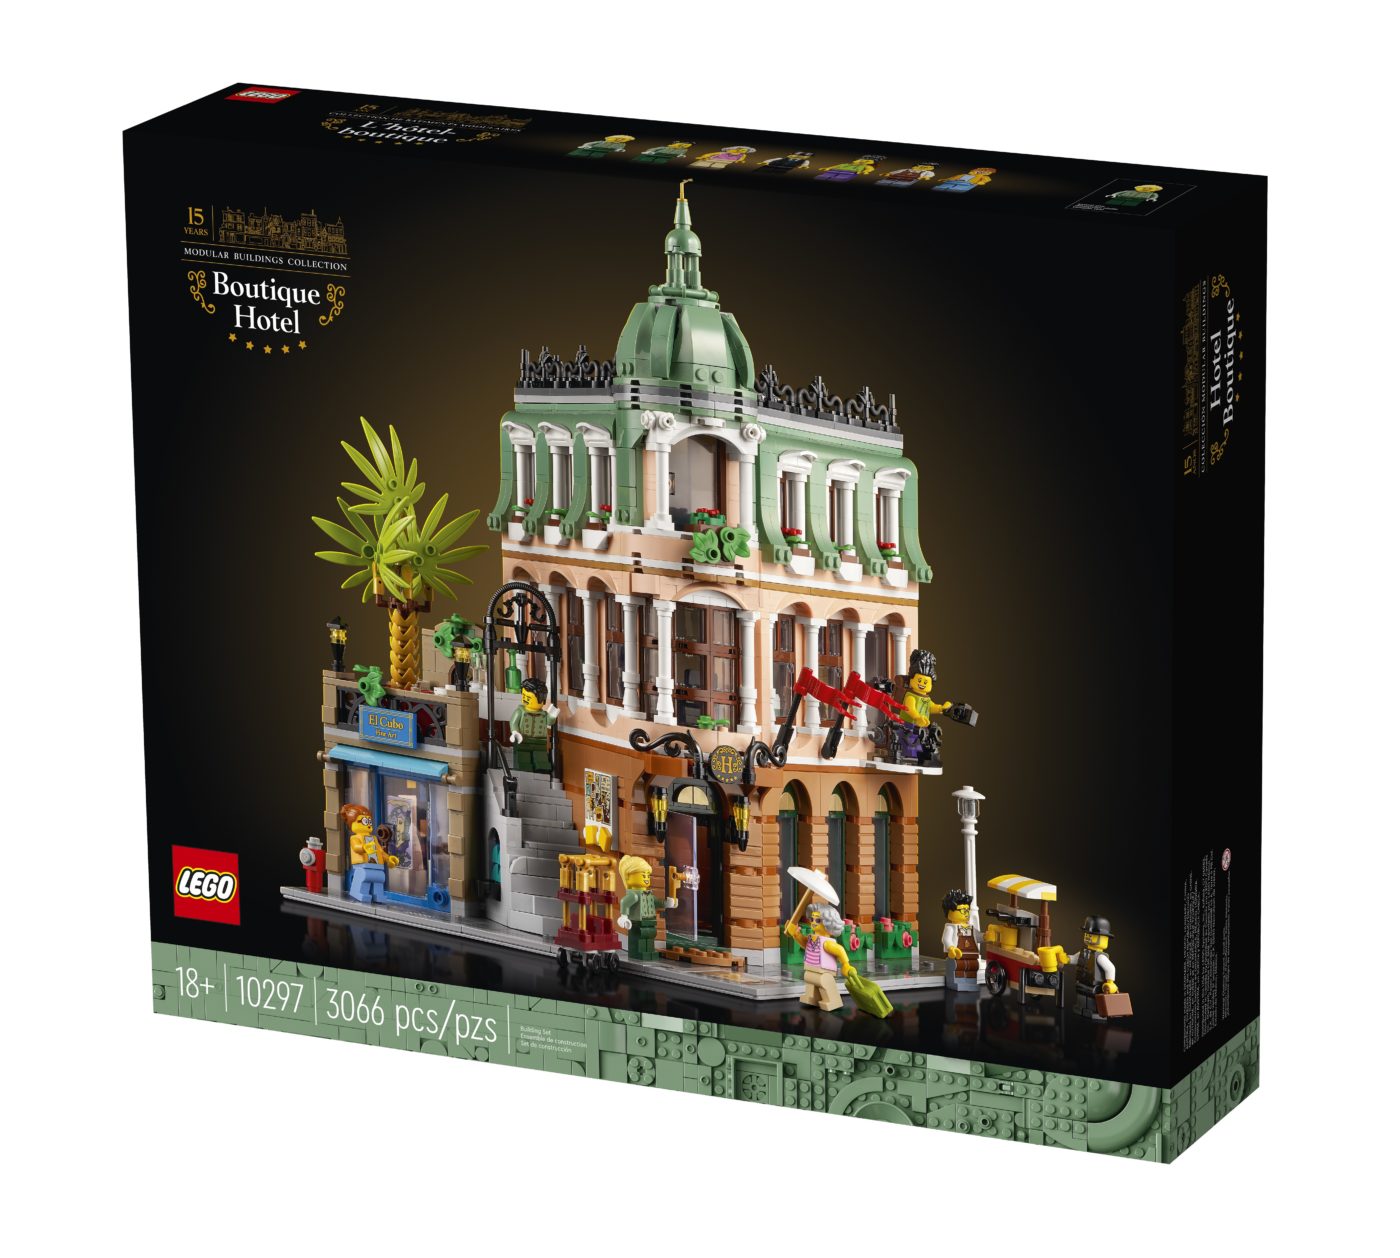 Guide To All The New Lego Sets Releasing On 1 January 2022 - Jay's Brick Blog